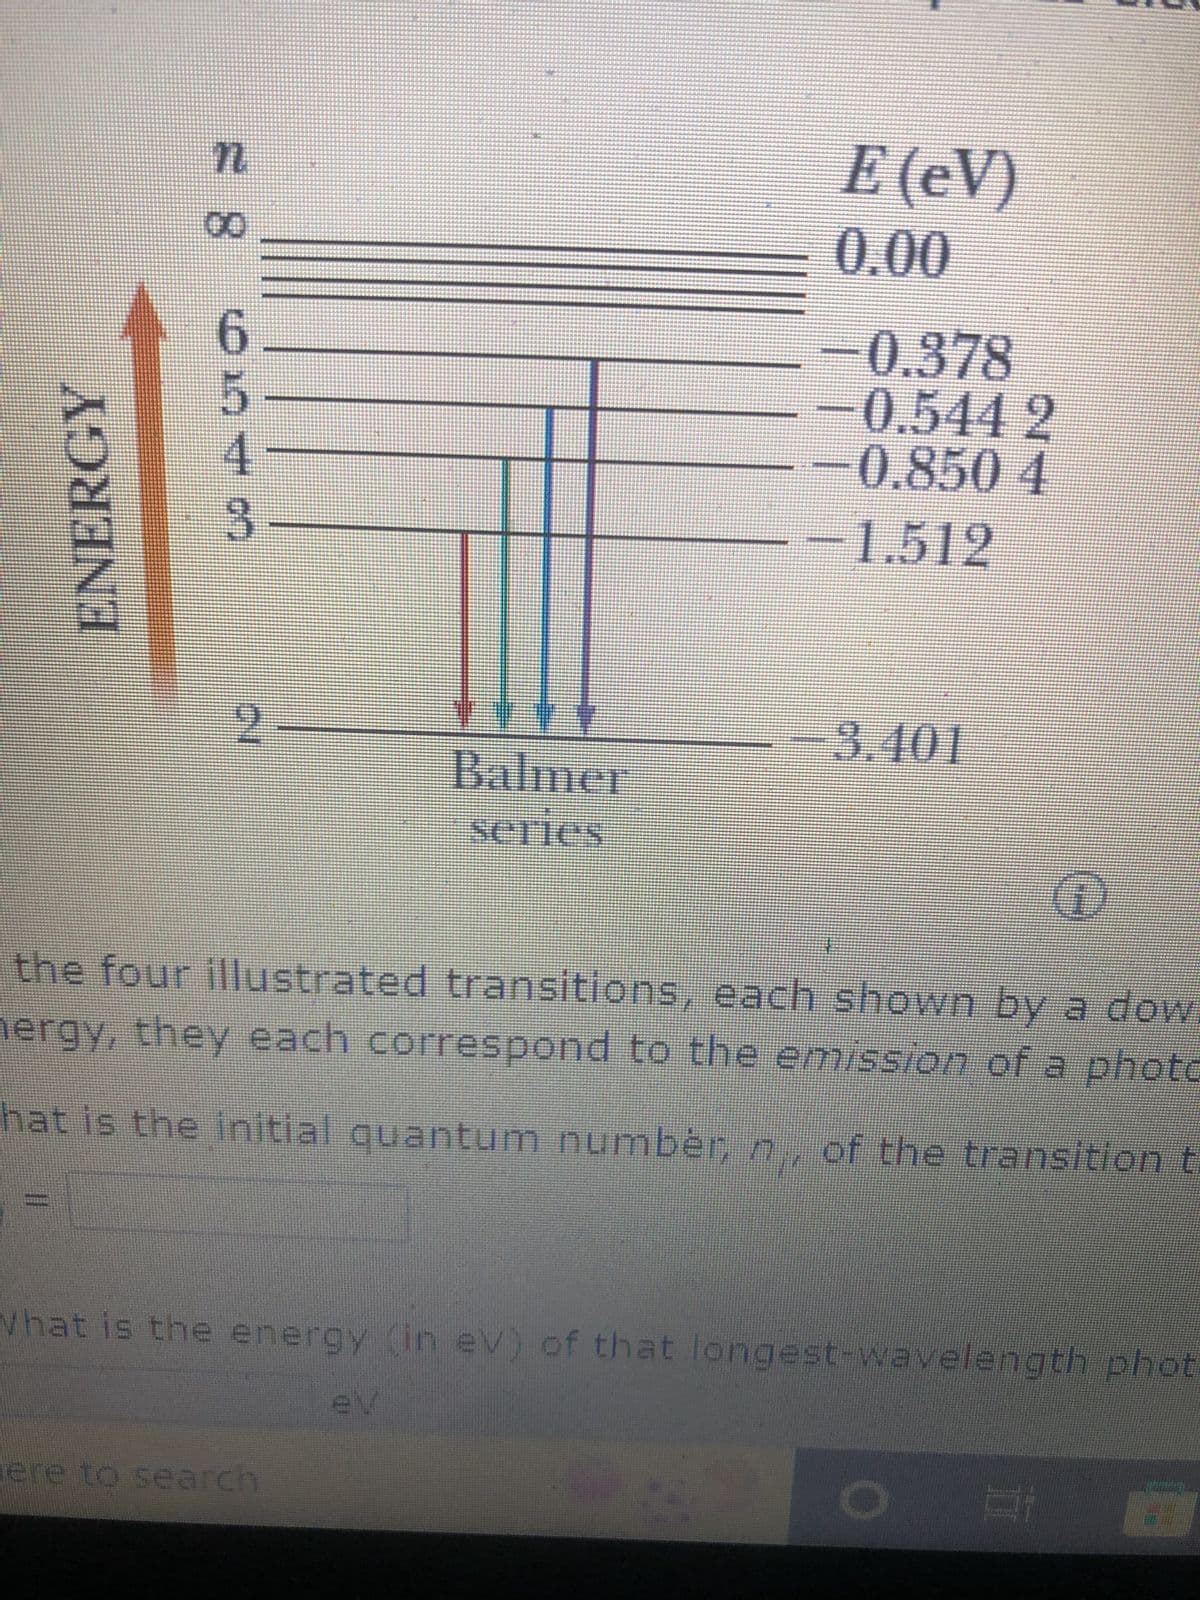 ENERGY
n
11
8
00
110 7 CO
5
3
2
Balmer
series
E (eV)
0.00
-0.378
ere to search
-0,544 2
0.850 4
-1.512
the four illustrated transitions, each shown by a dow
hergy, they each correspond to the emission of a photo
-3.401
hat is the initial quantum number, m, of the transition t
What is the energy (in eV) of that longest-wavelength phot
di
#1